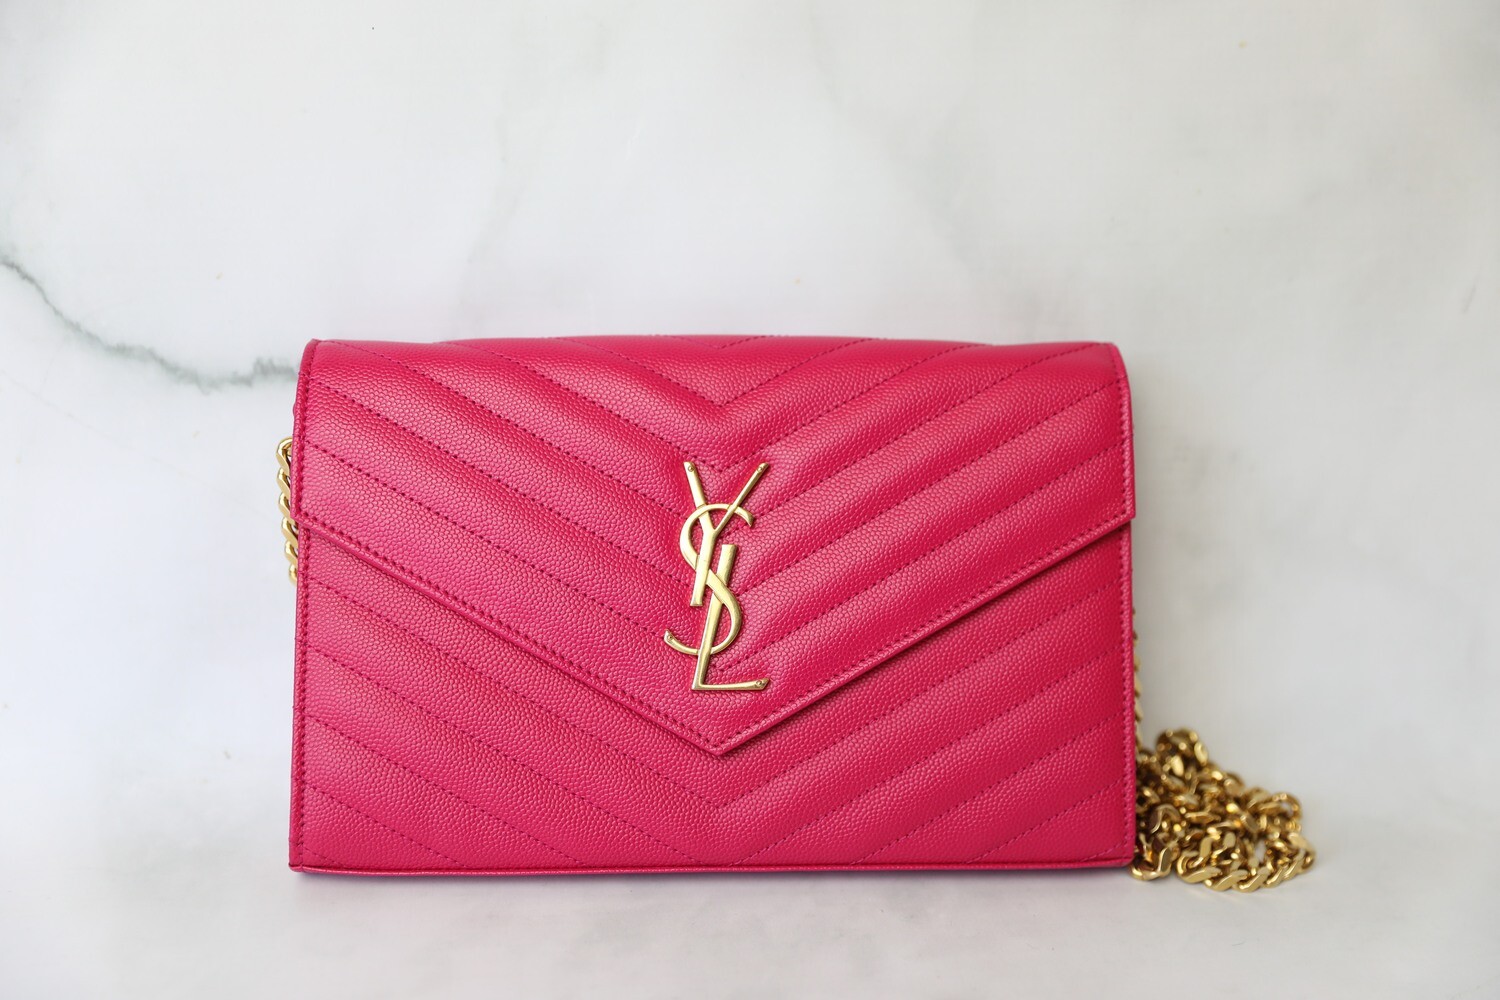 Saint Laurent Wallet on Chain Large, Hot Pink with Gold Hardware, Preowned no dustbag WA001